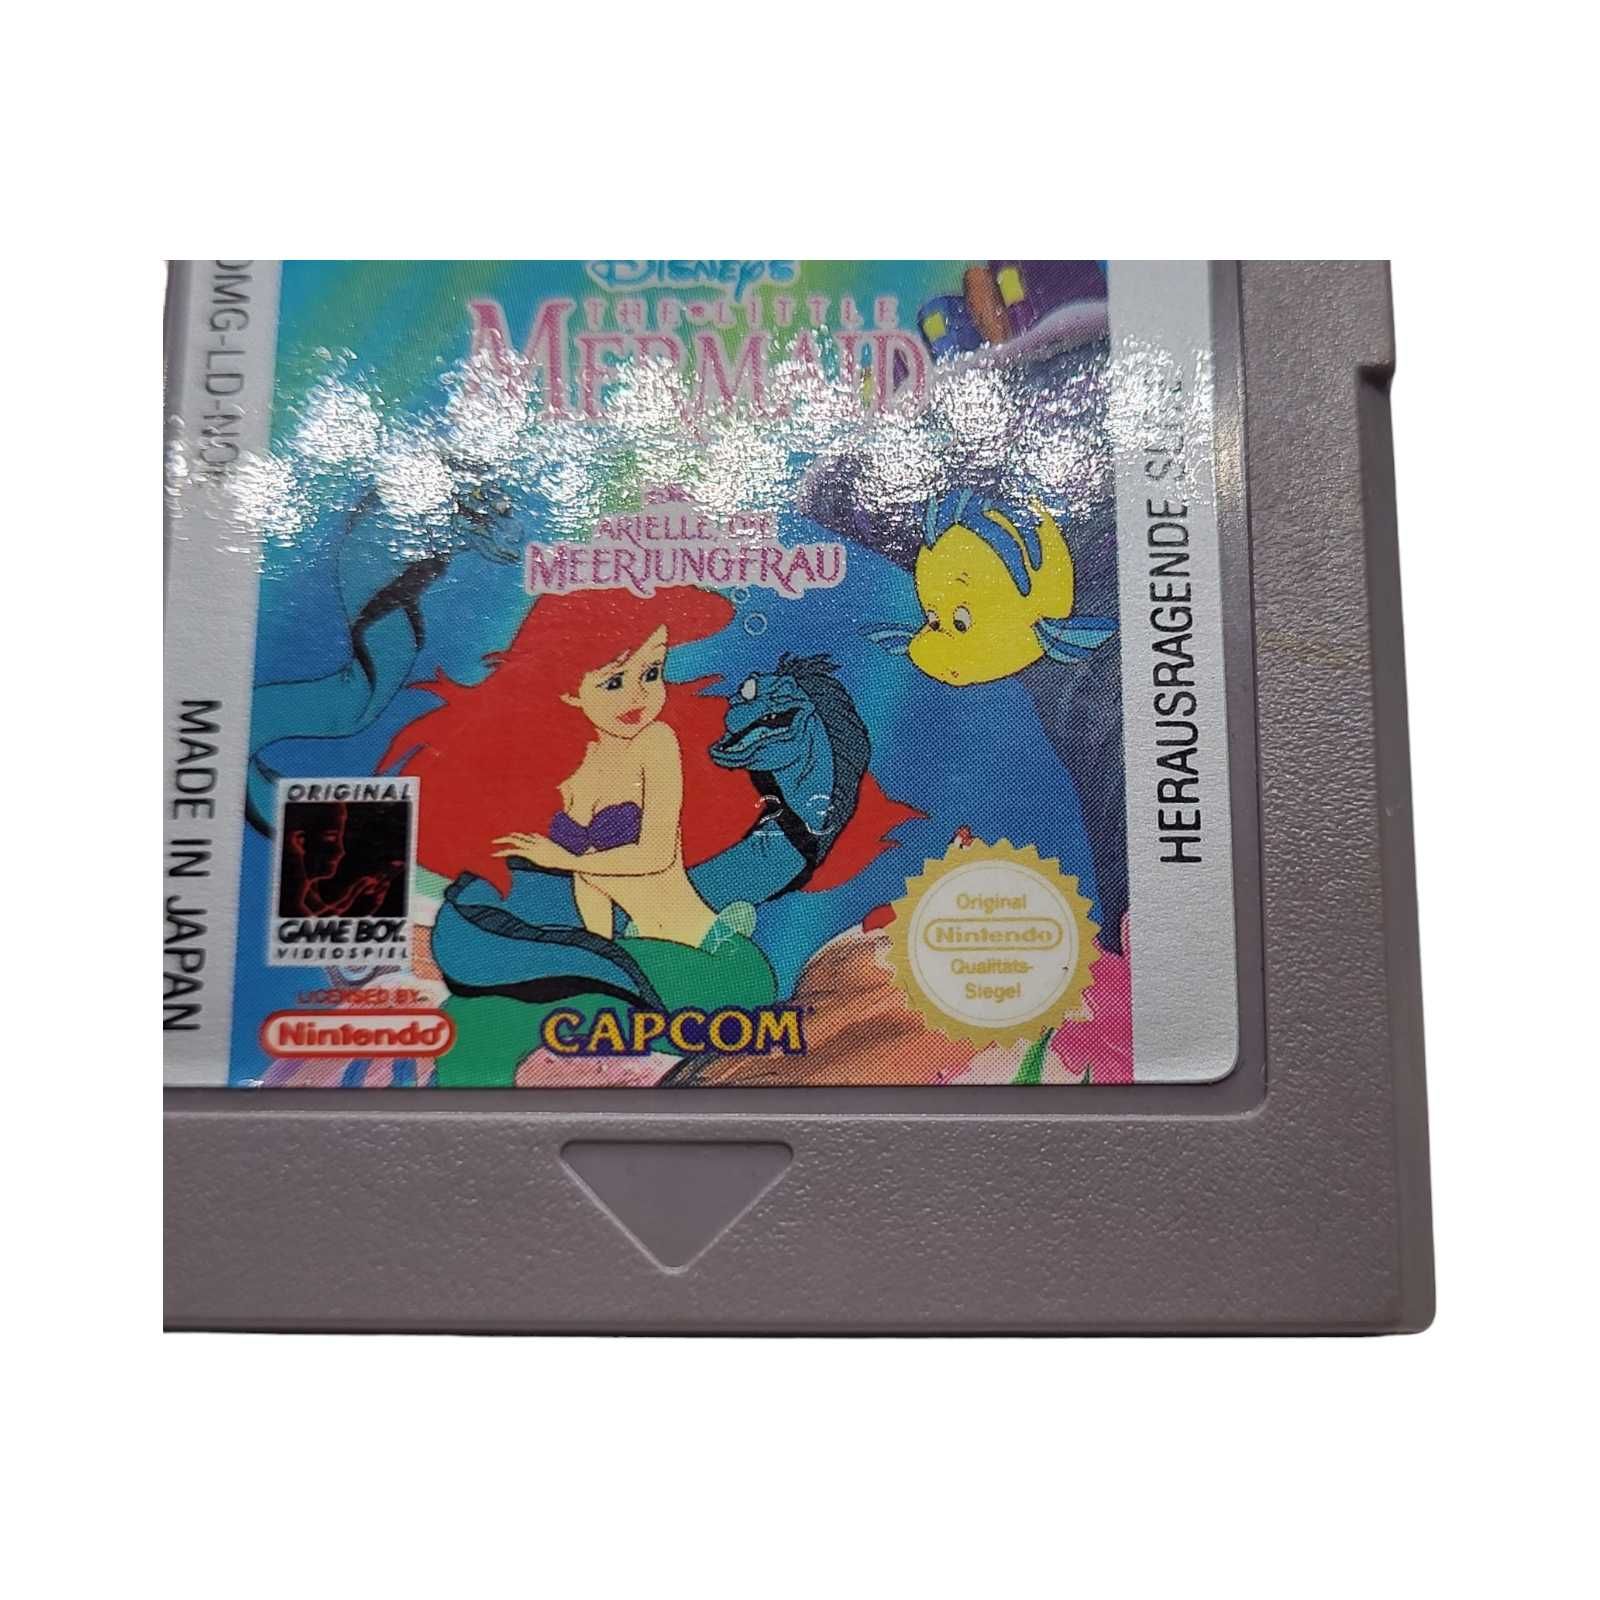 The Little Mermaid Game Boy Gameboy Classic